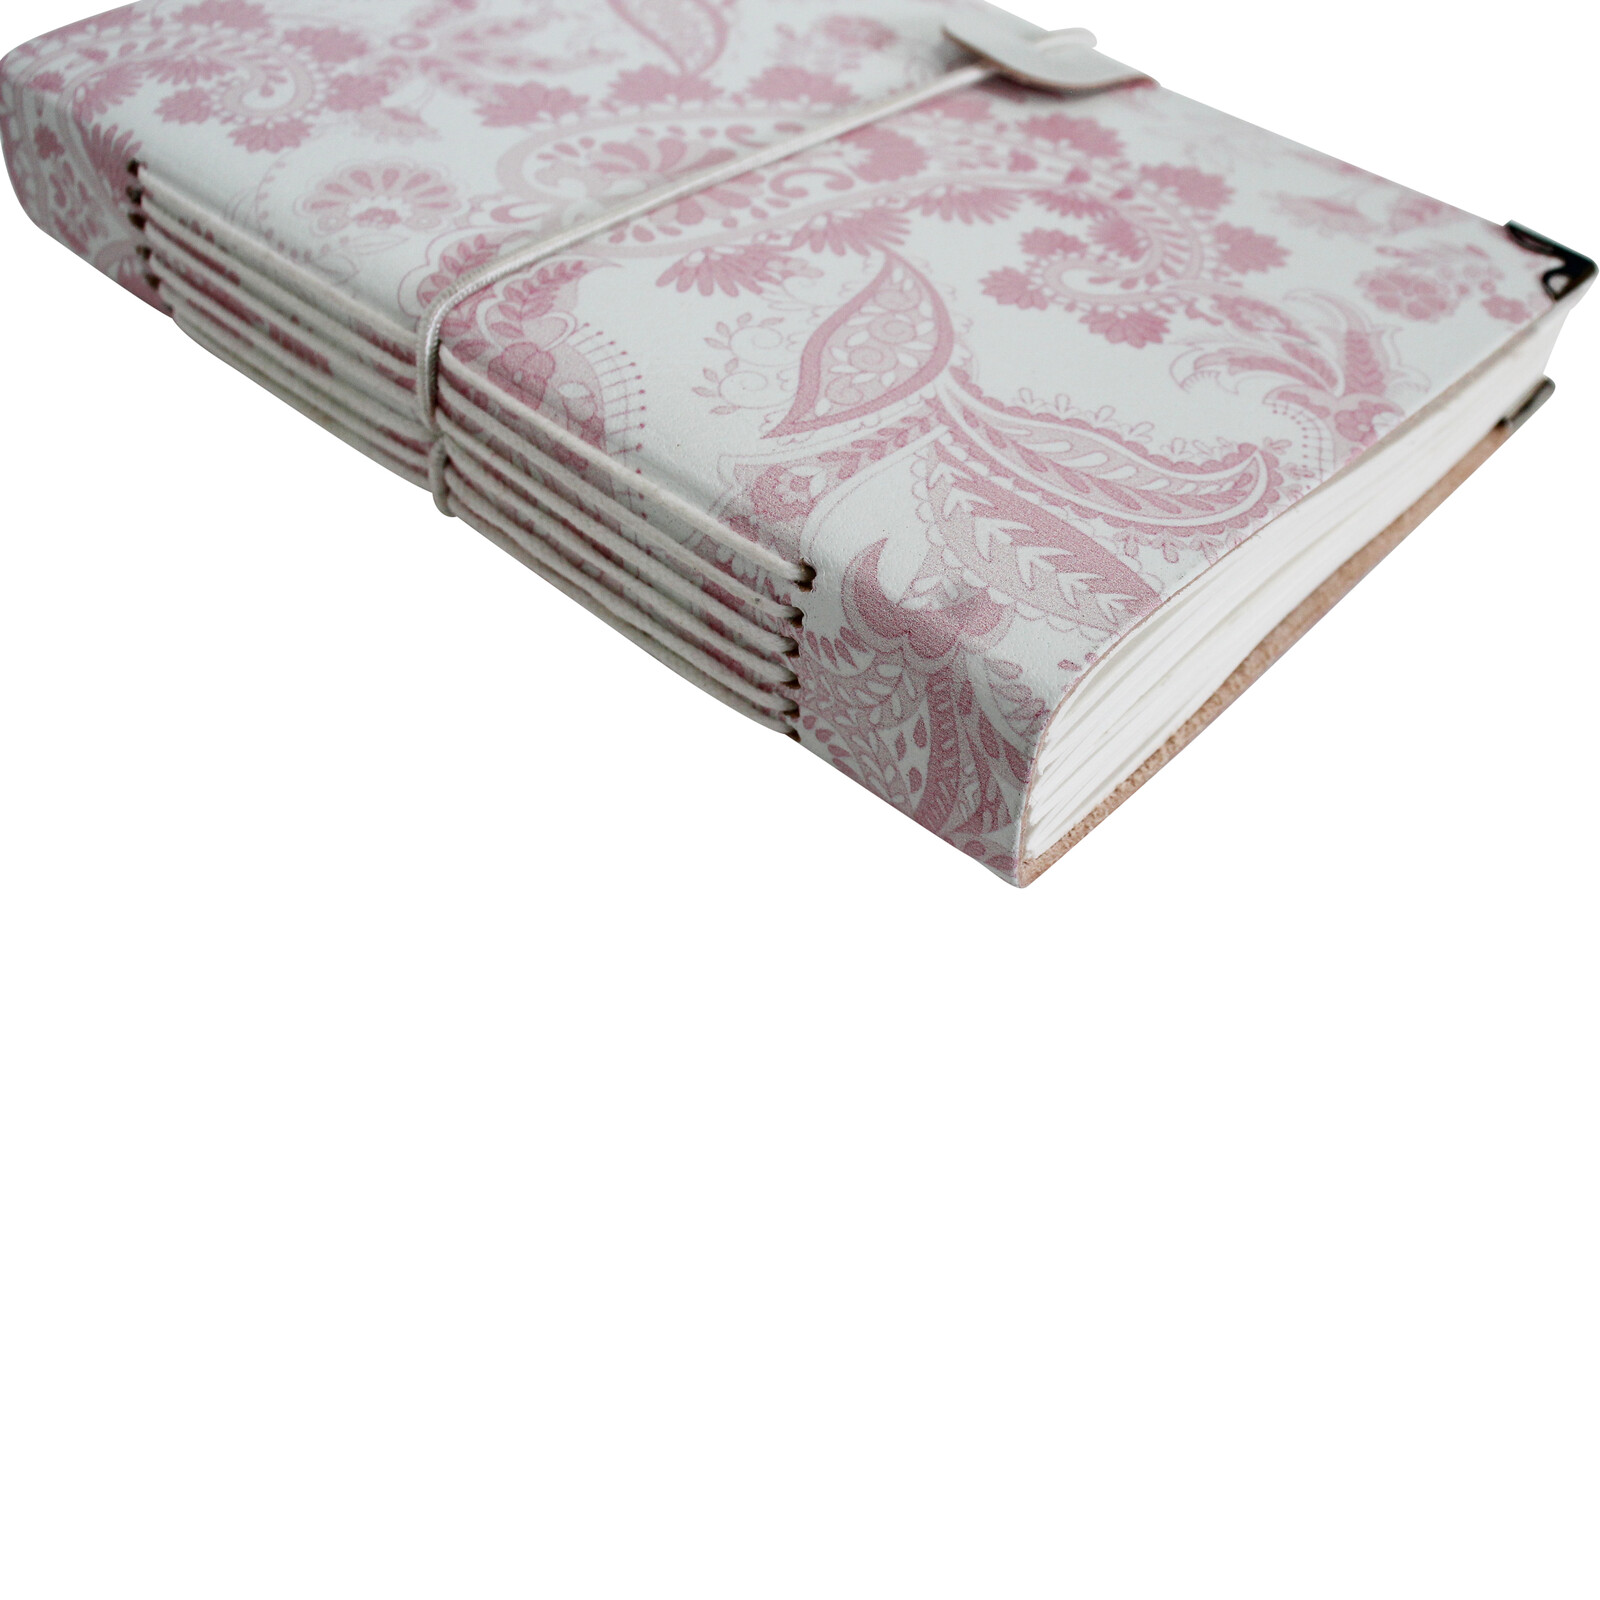 Leather N/Book Pink Paisley